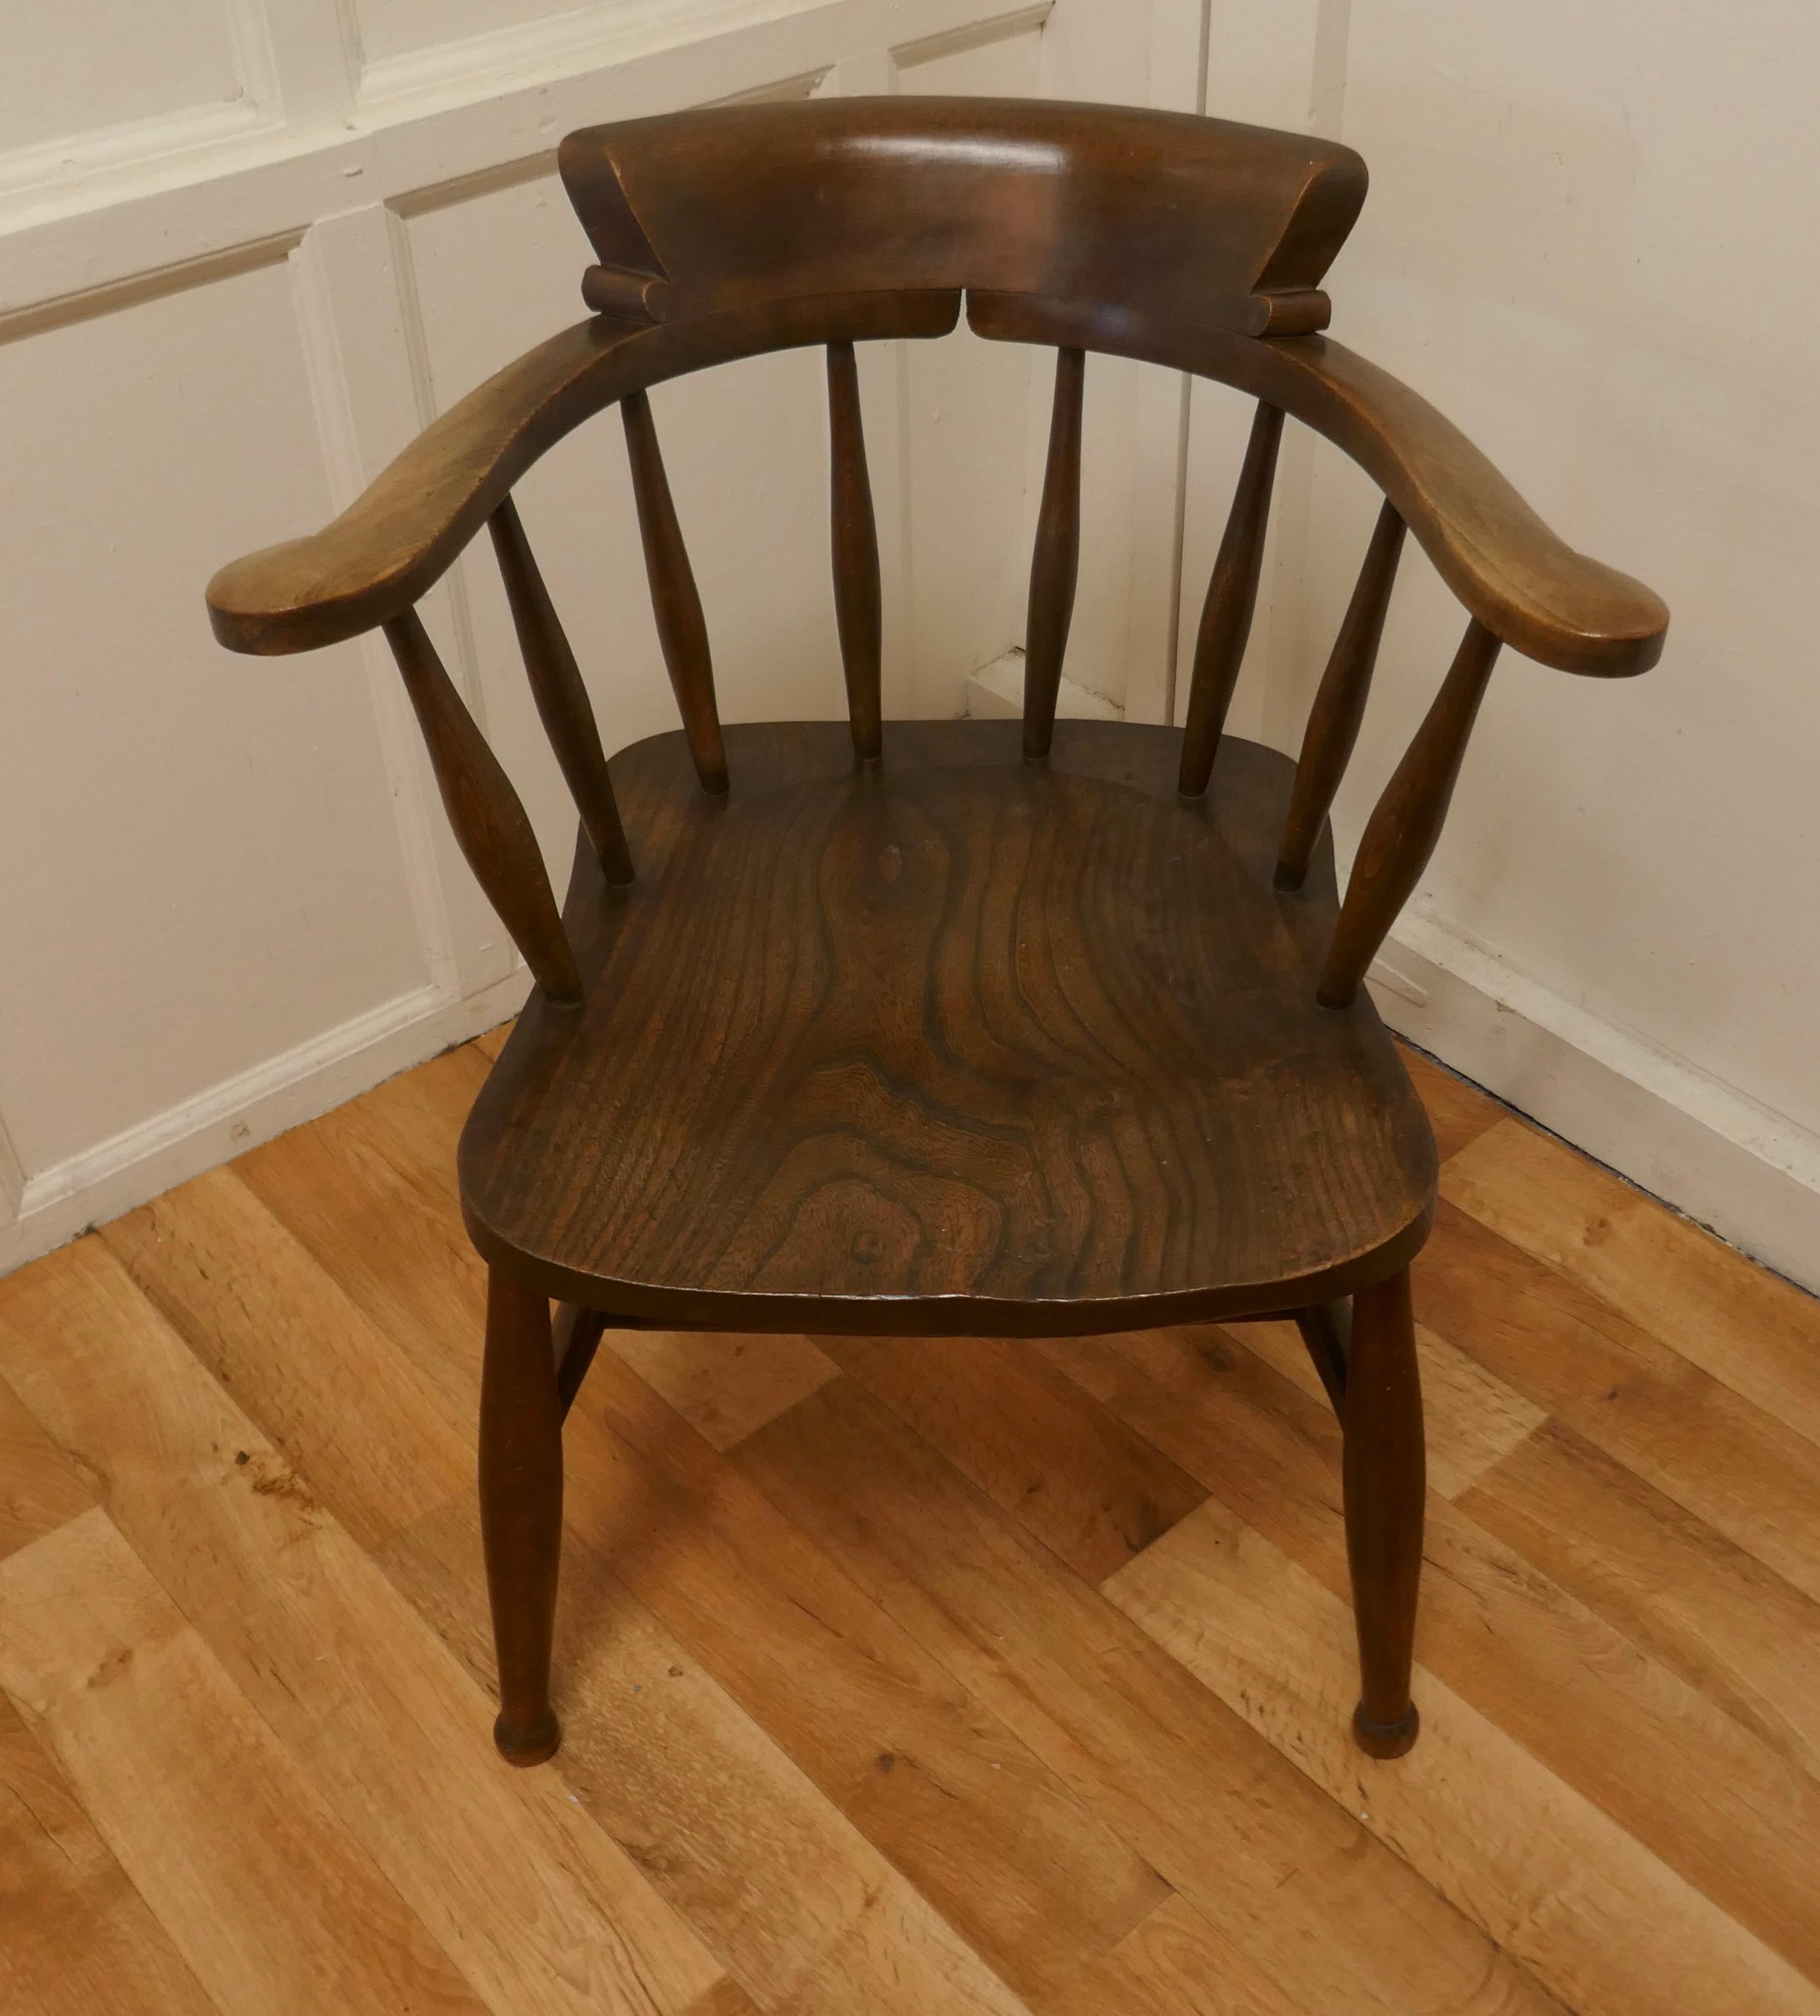 Beech and Elm smokers bow office or desk chair

The chair has a solid Elm saddle carved seat and an attractive curving back with a wide curved top rail and double stretchers underneath 
The chair stands on sturdy turned legs and is in good sound